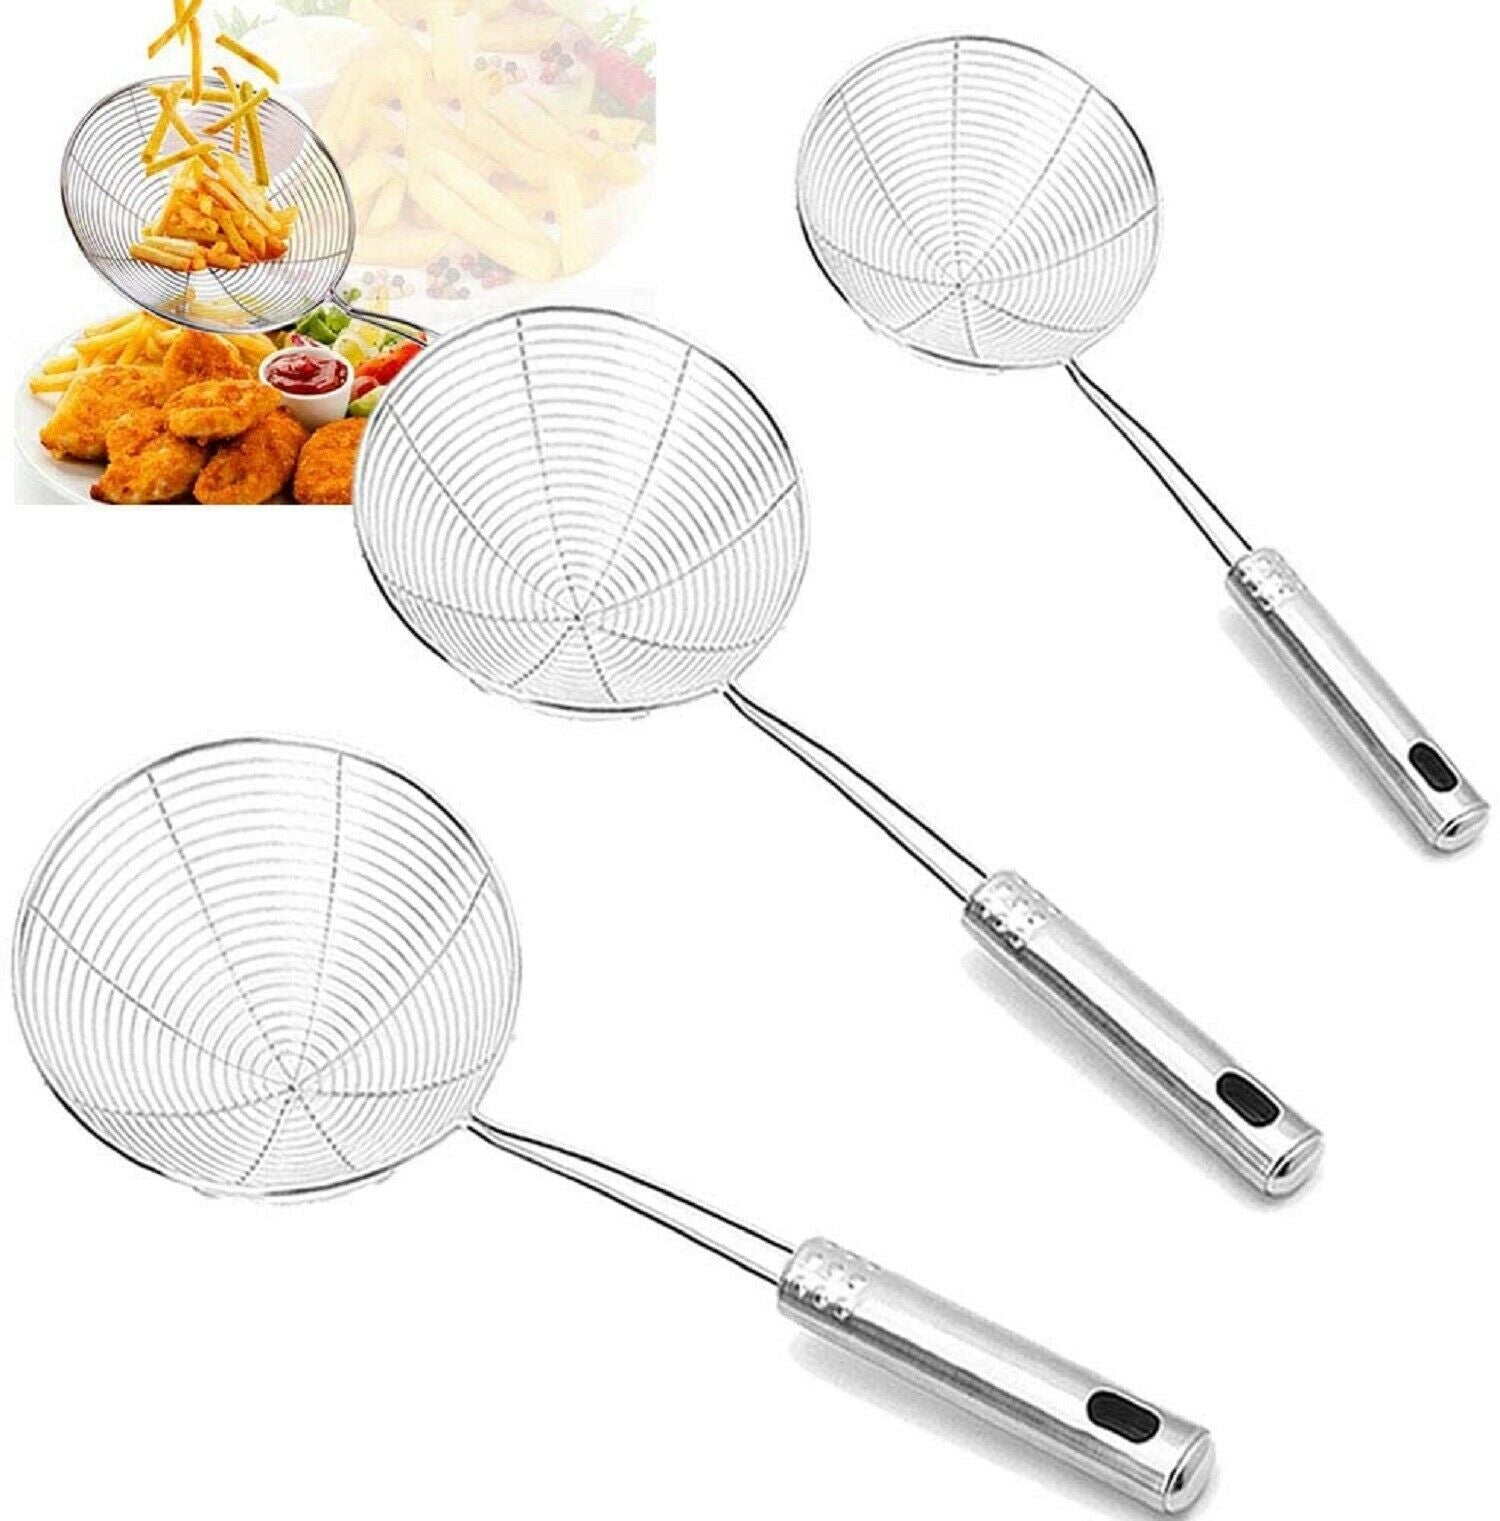 Stainless Steel Skimmer for Cheese Making | Cheese Making